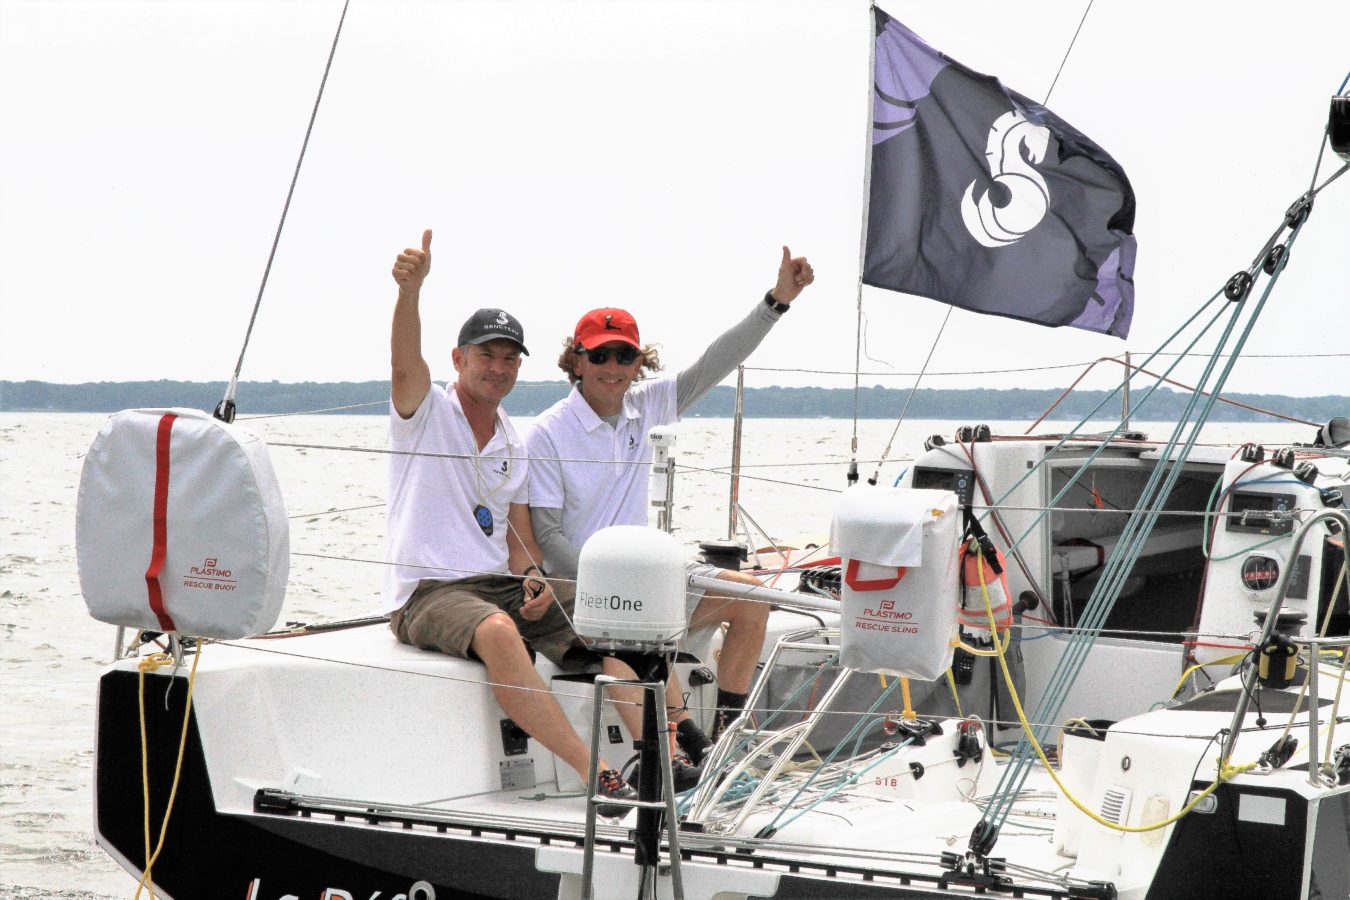 DOUBLEHANDED TEAM WINS THE ANNAPOLIS TO NEWPORT